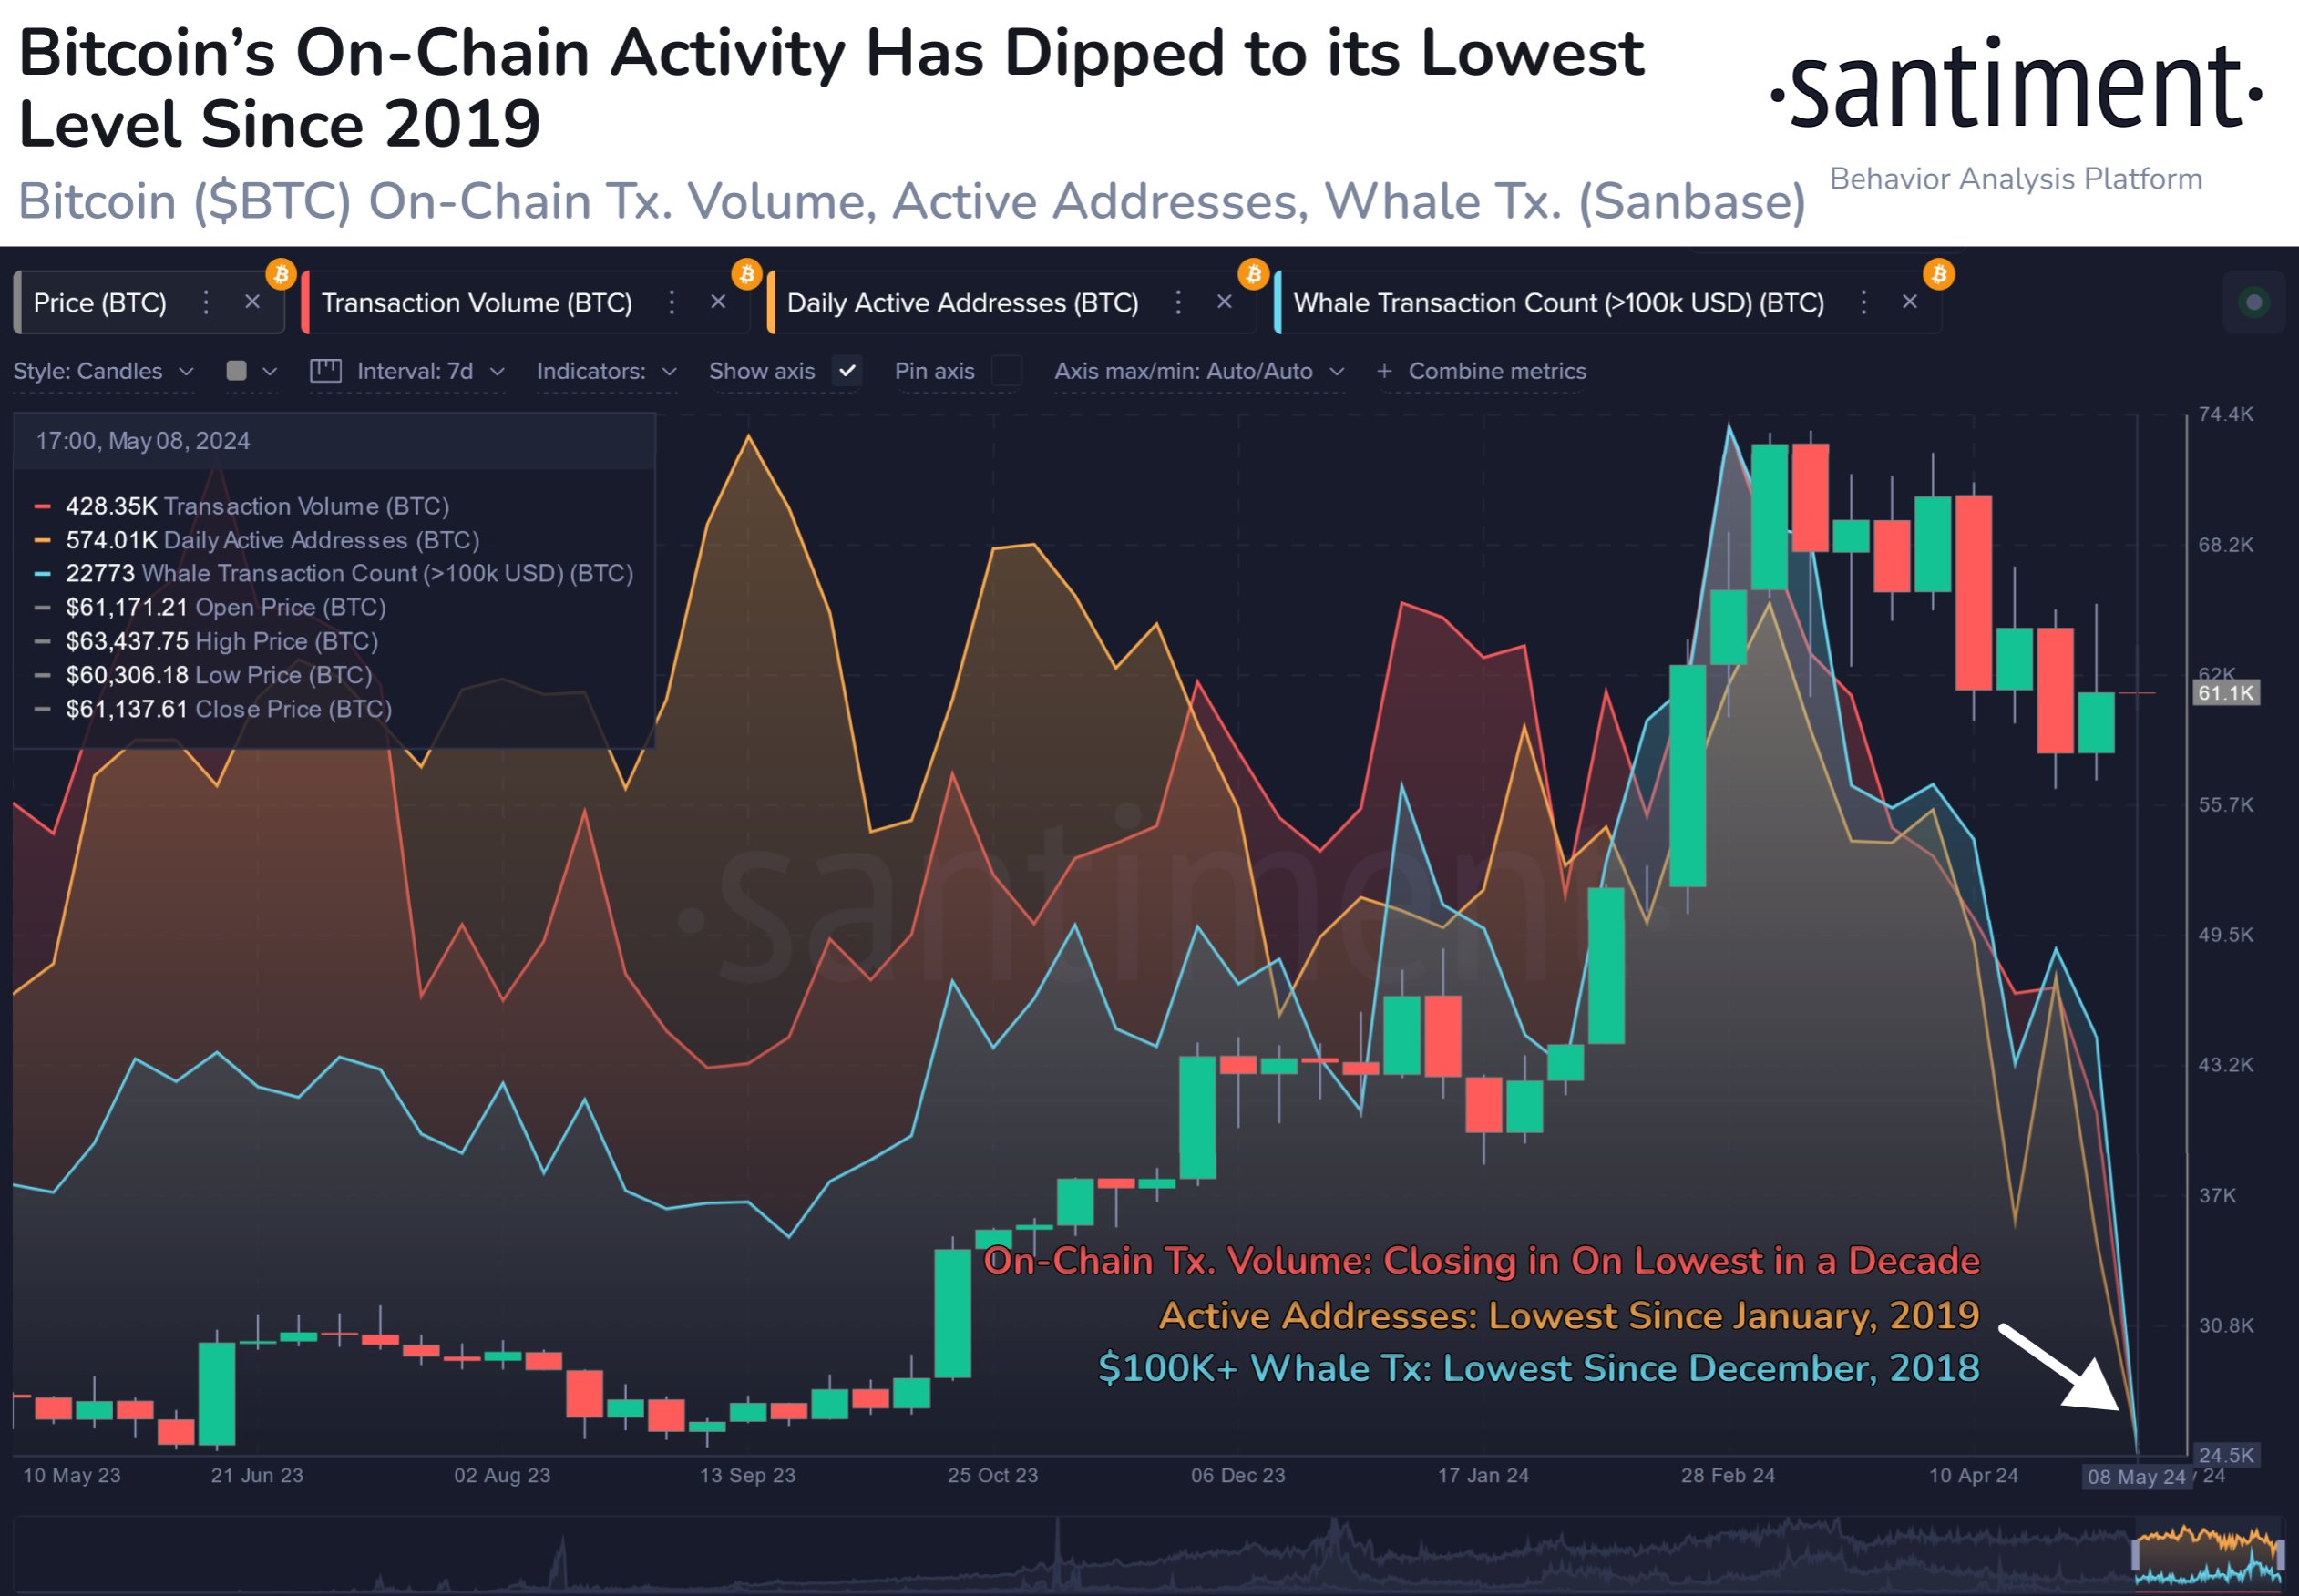 Bitcoin On-Chain Activity Nearing Historic Lows  What This Means For BTC Price